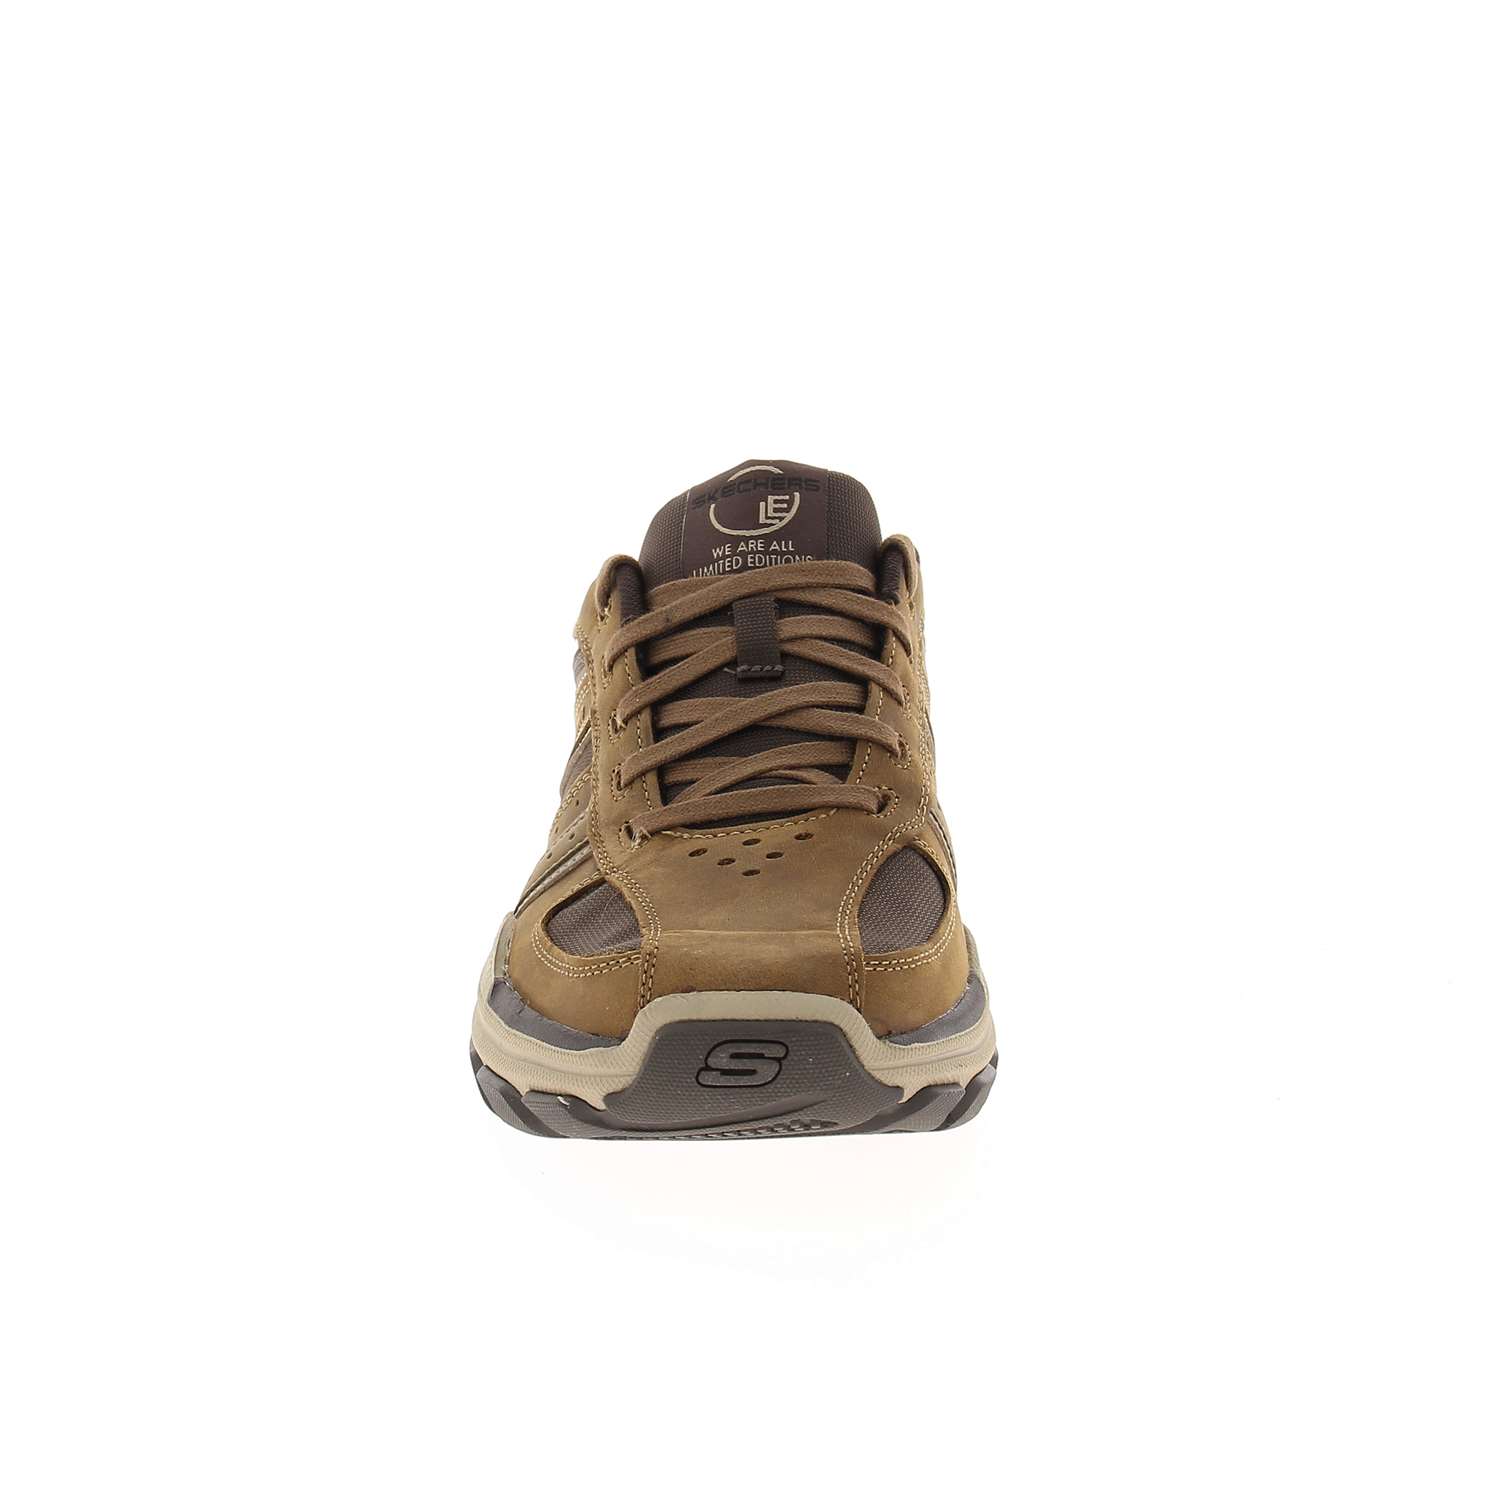 03 - RESPECTED RELAXED FIT - SKECHERS - Baskets - Nubuck